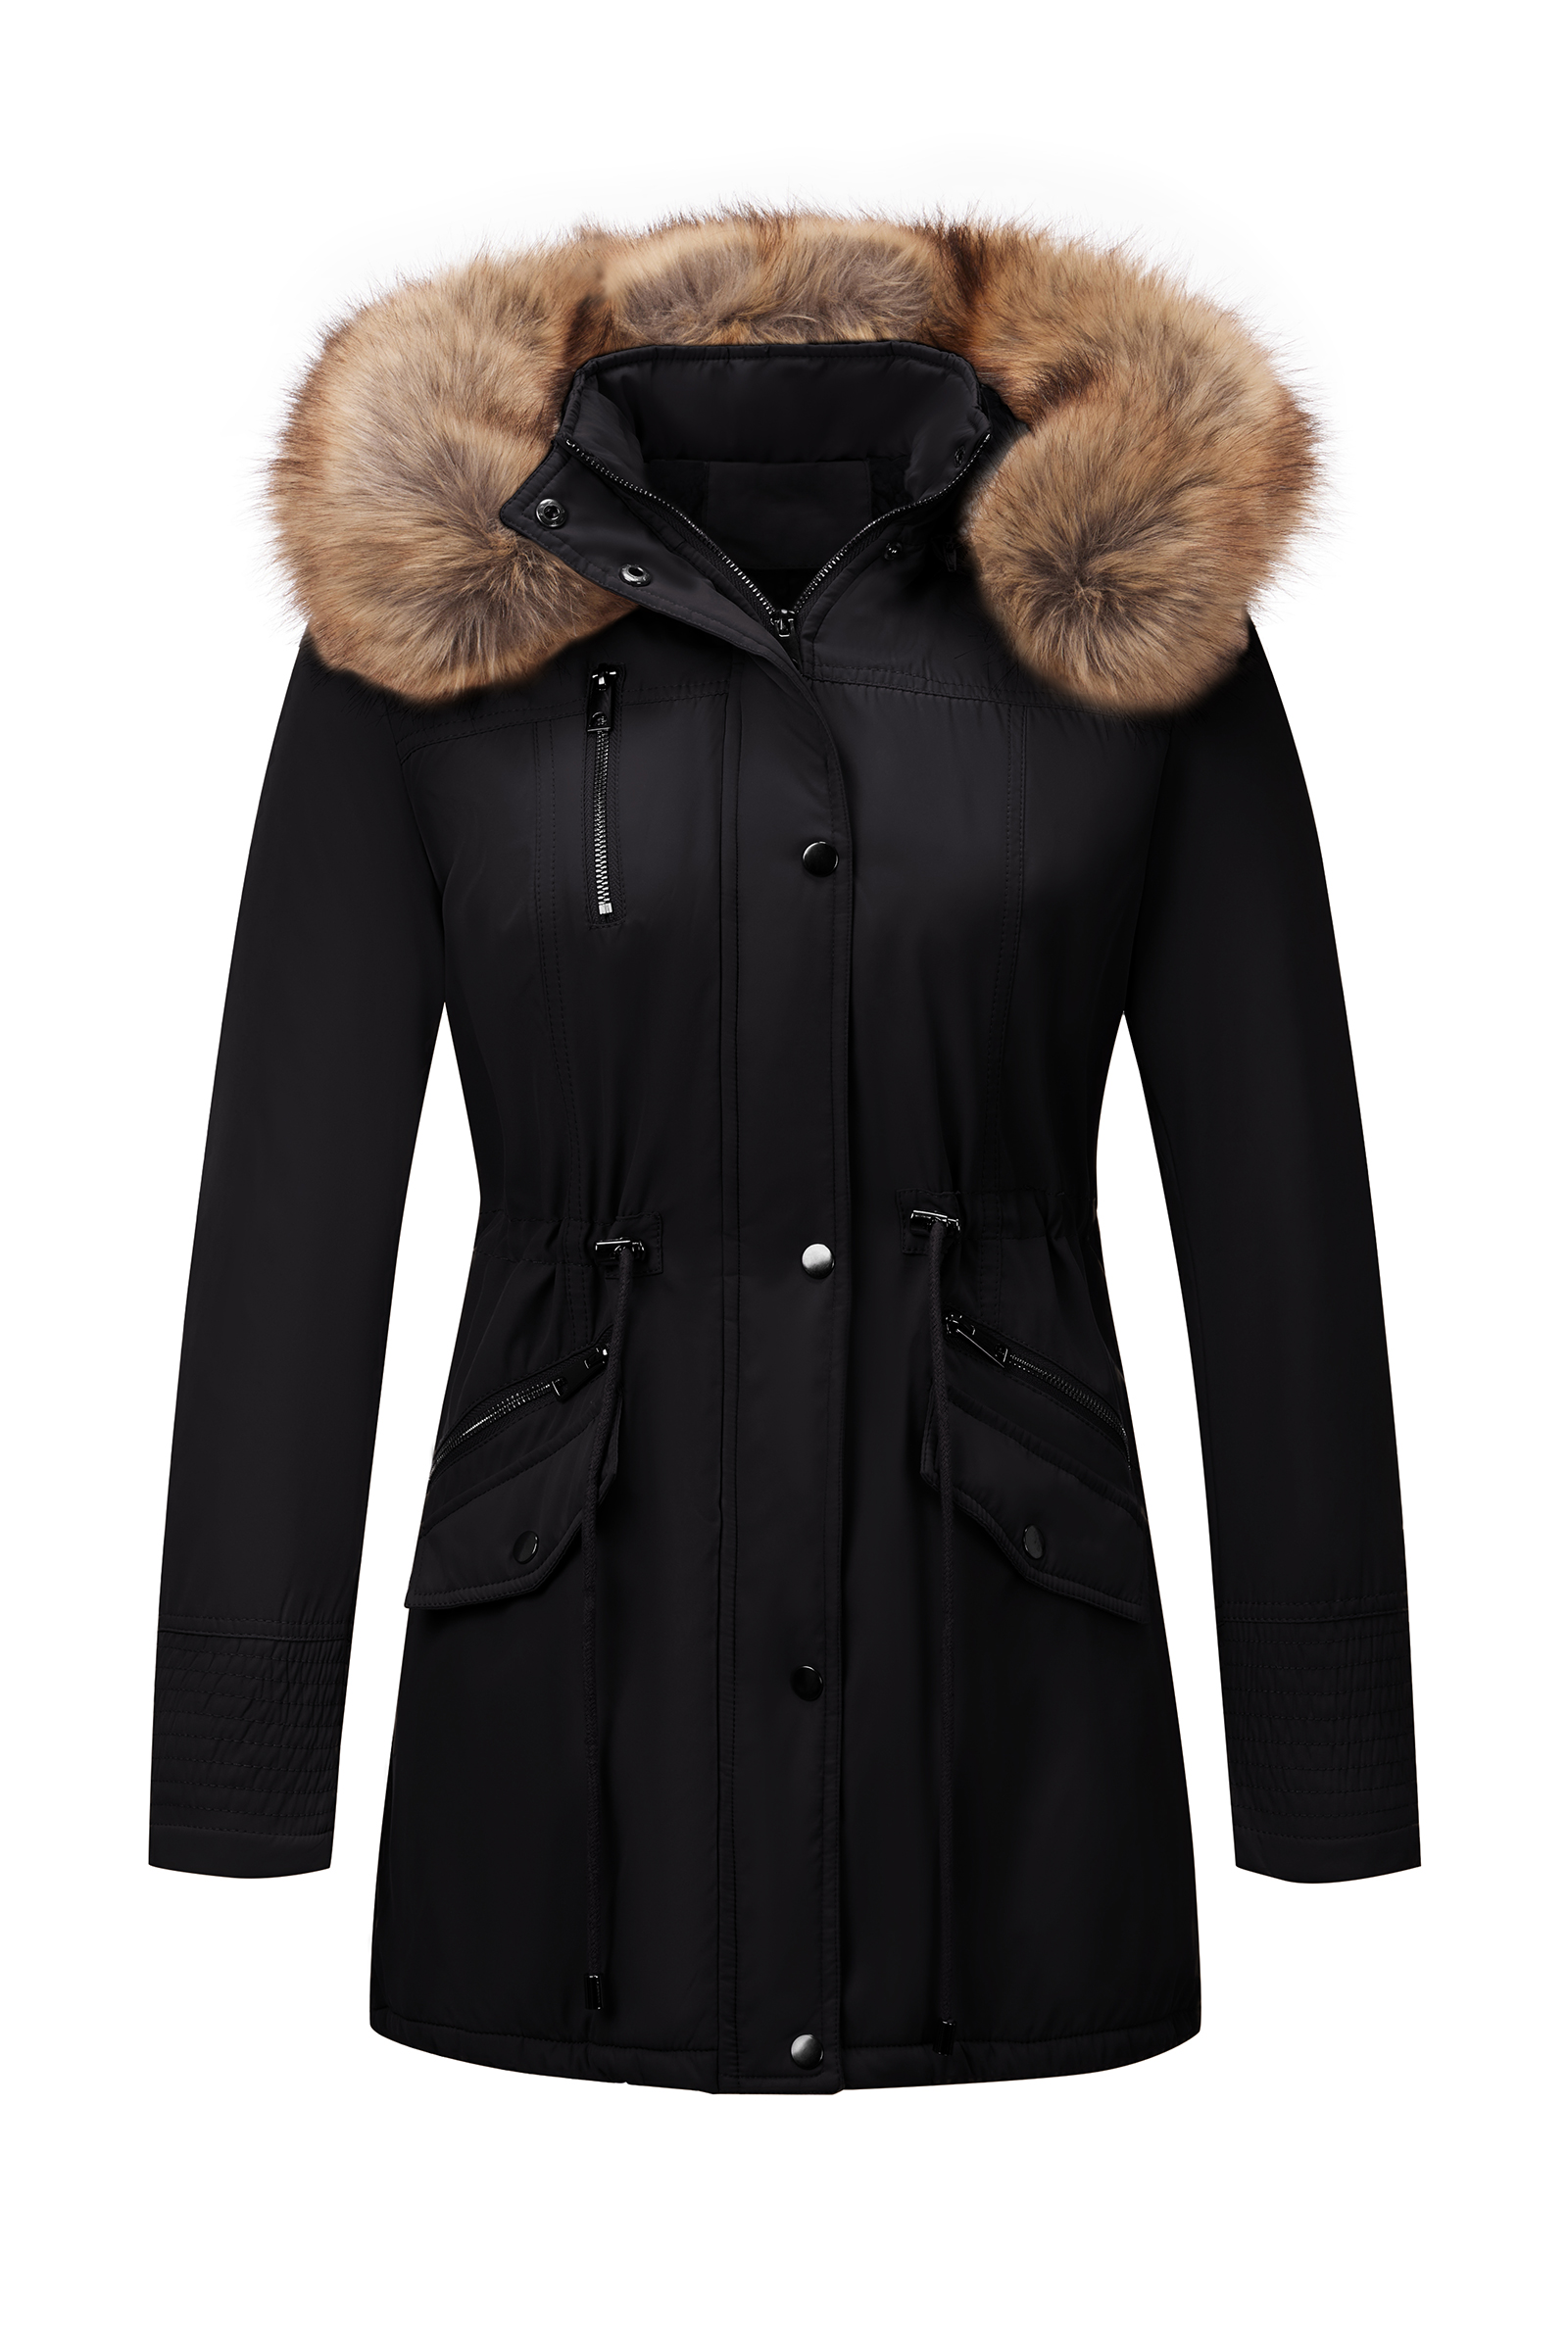 Giolshon Women's Twill Parka Jacket with Faux Fur Collar,Warm Winter Coat for Women Fall and Winter - image 1 of 6